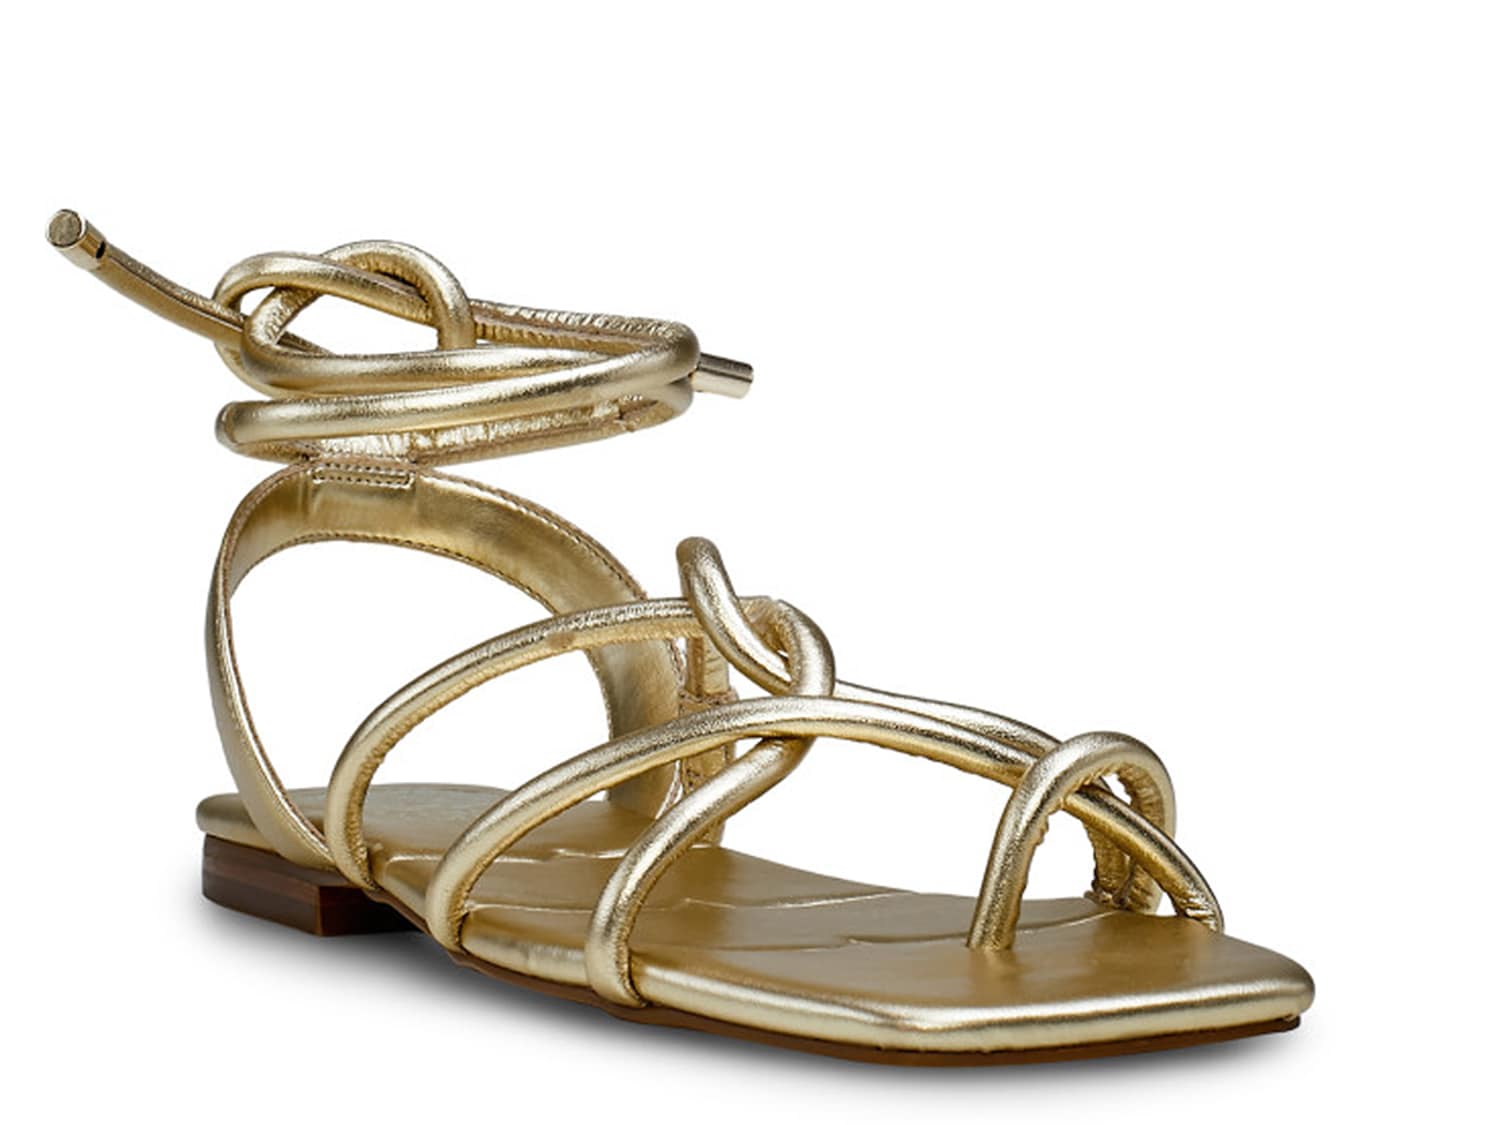 Vince Camuto Alminda Sandal - Free Shipping | DSW